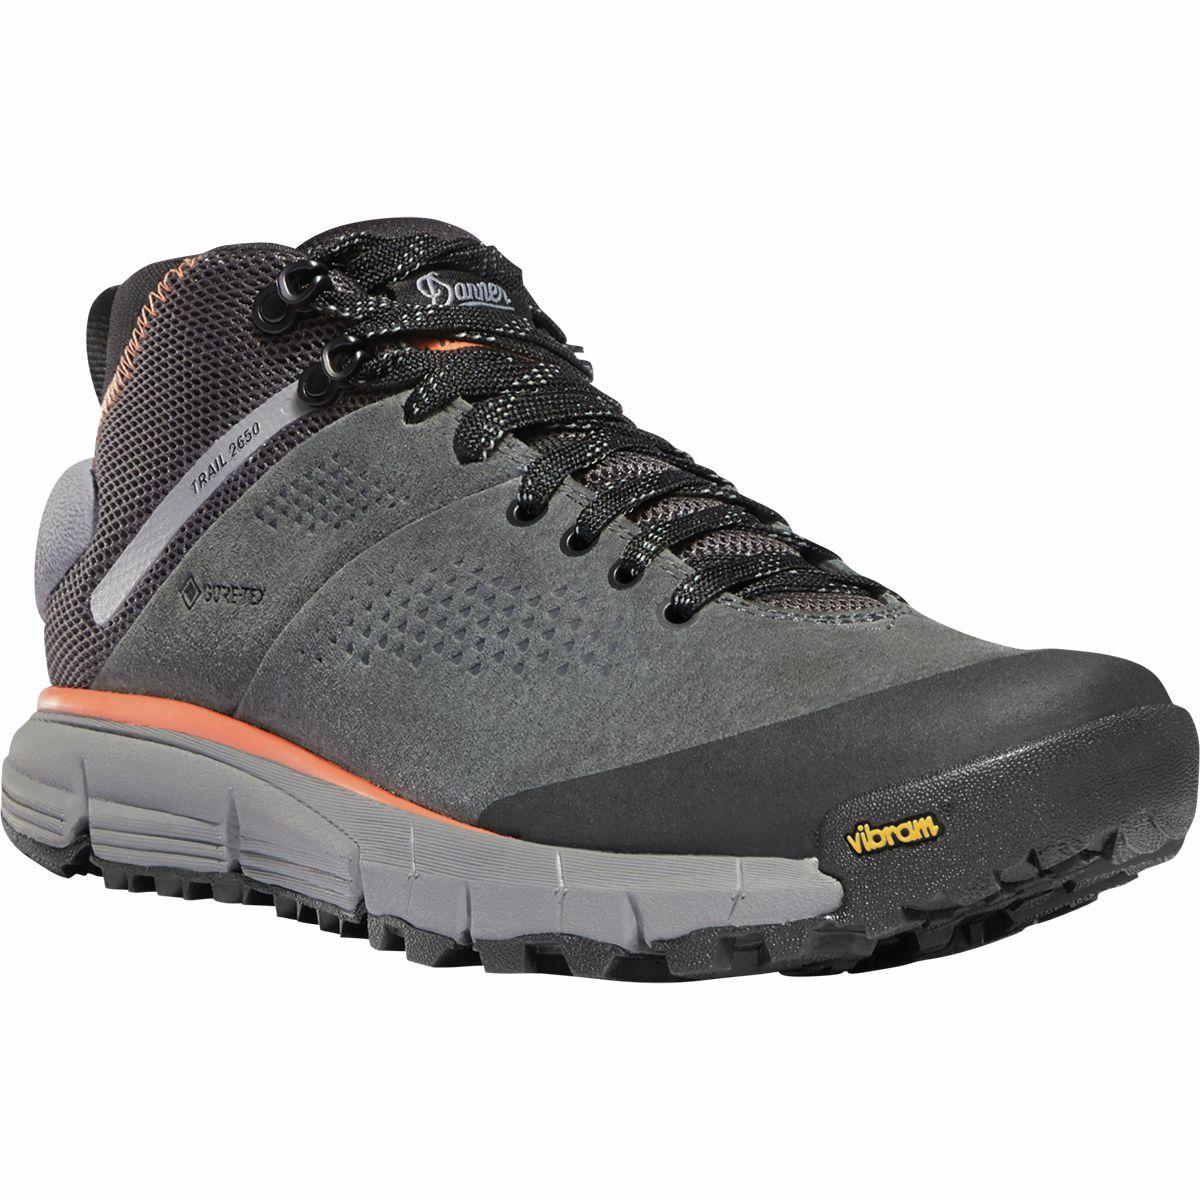 Danner Leather Trail 2650 Gtx Mid Hiking Boot in Dark Gray/Salmon (Gray ...